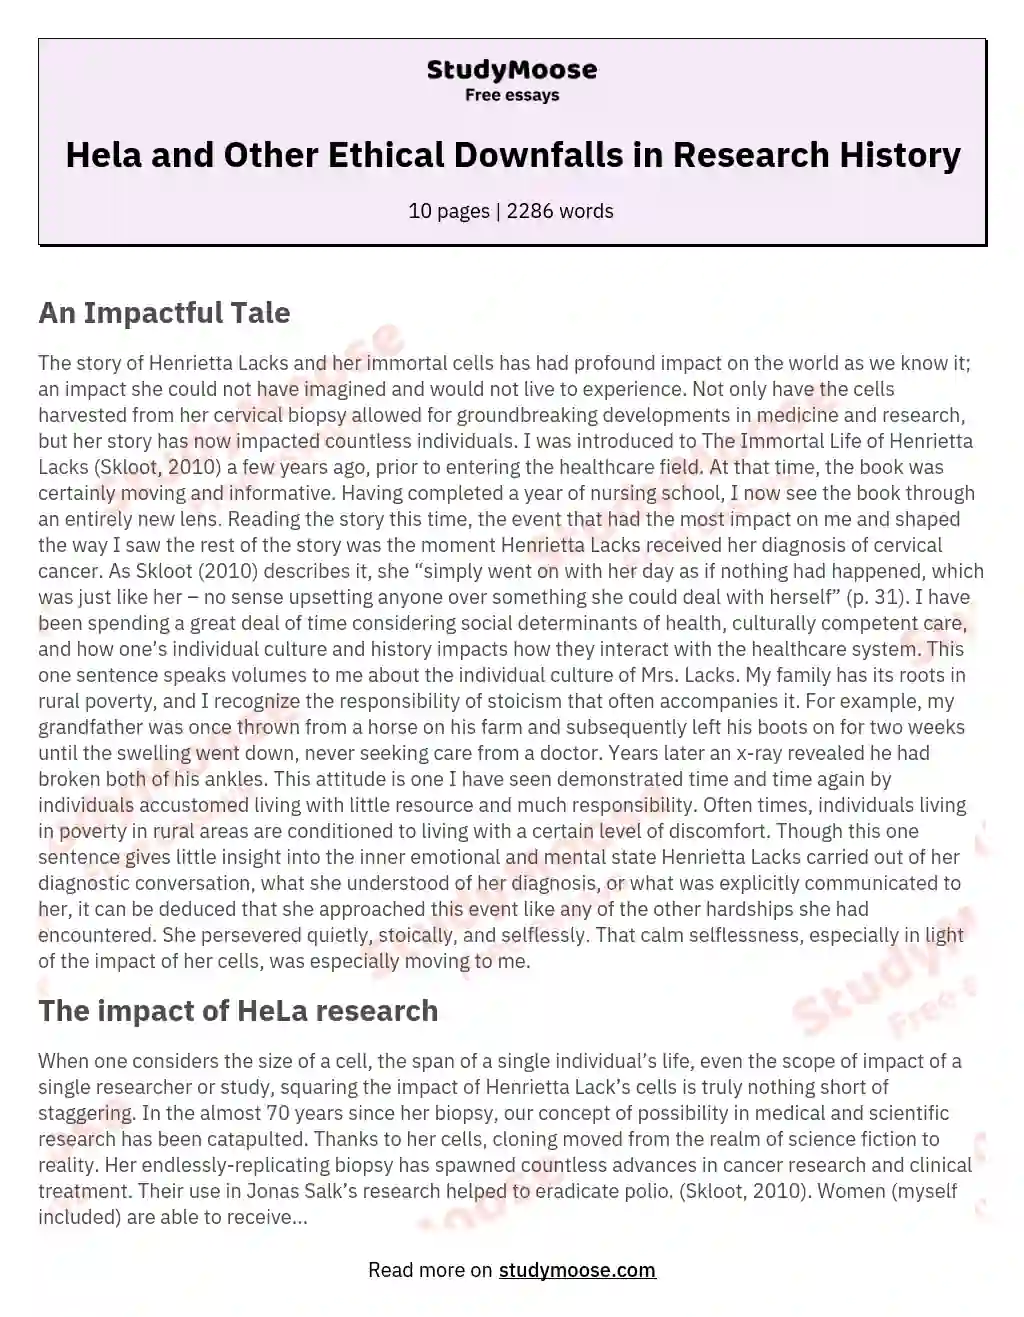 Hela and Other Ethical Downfalls in Research History essay